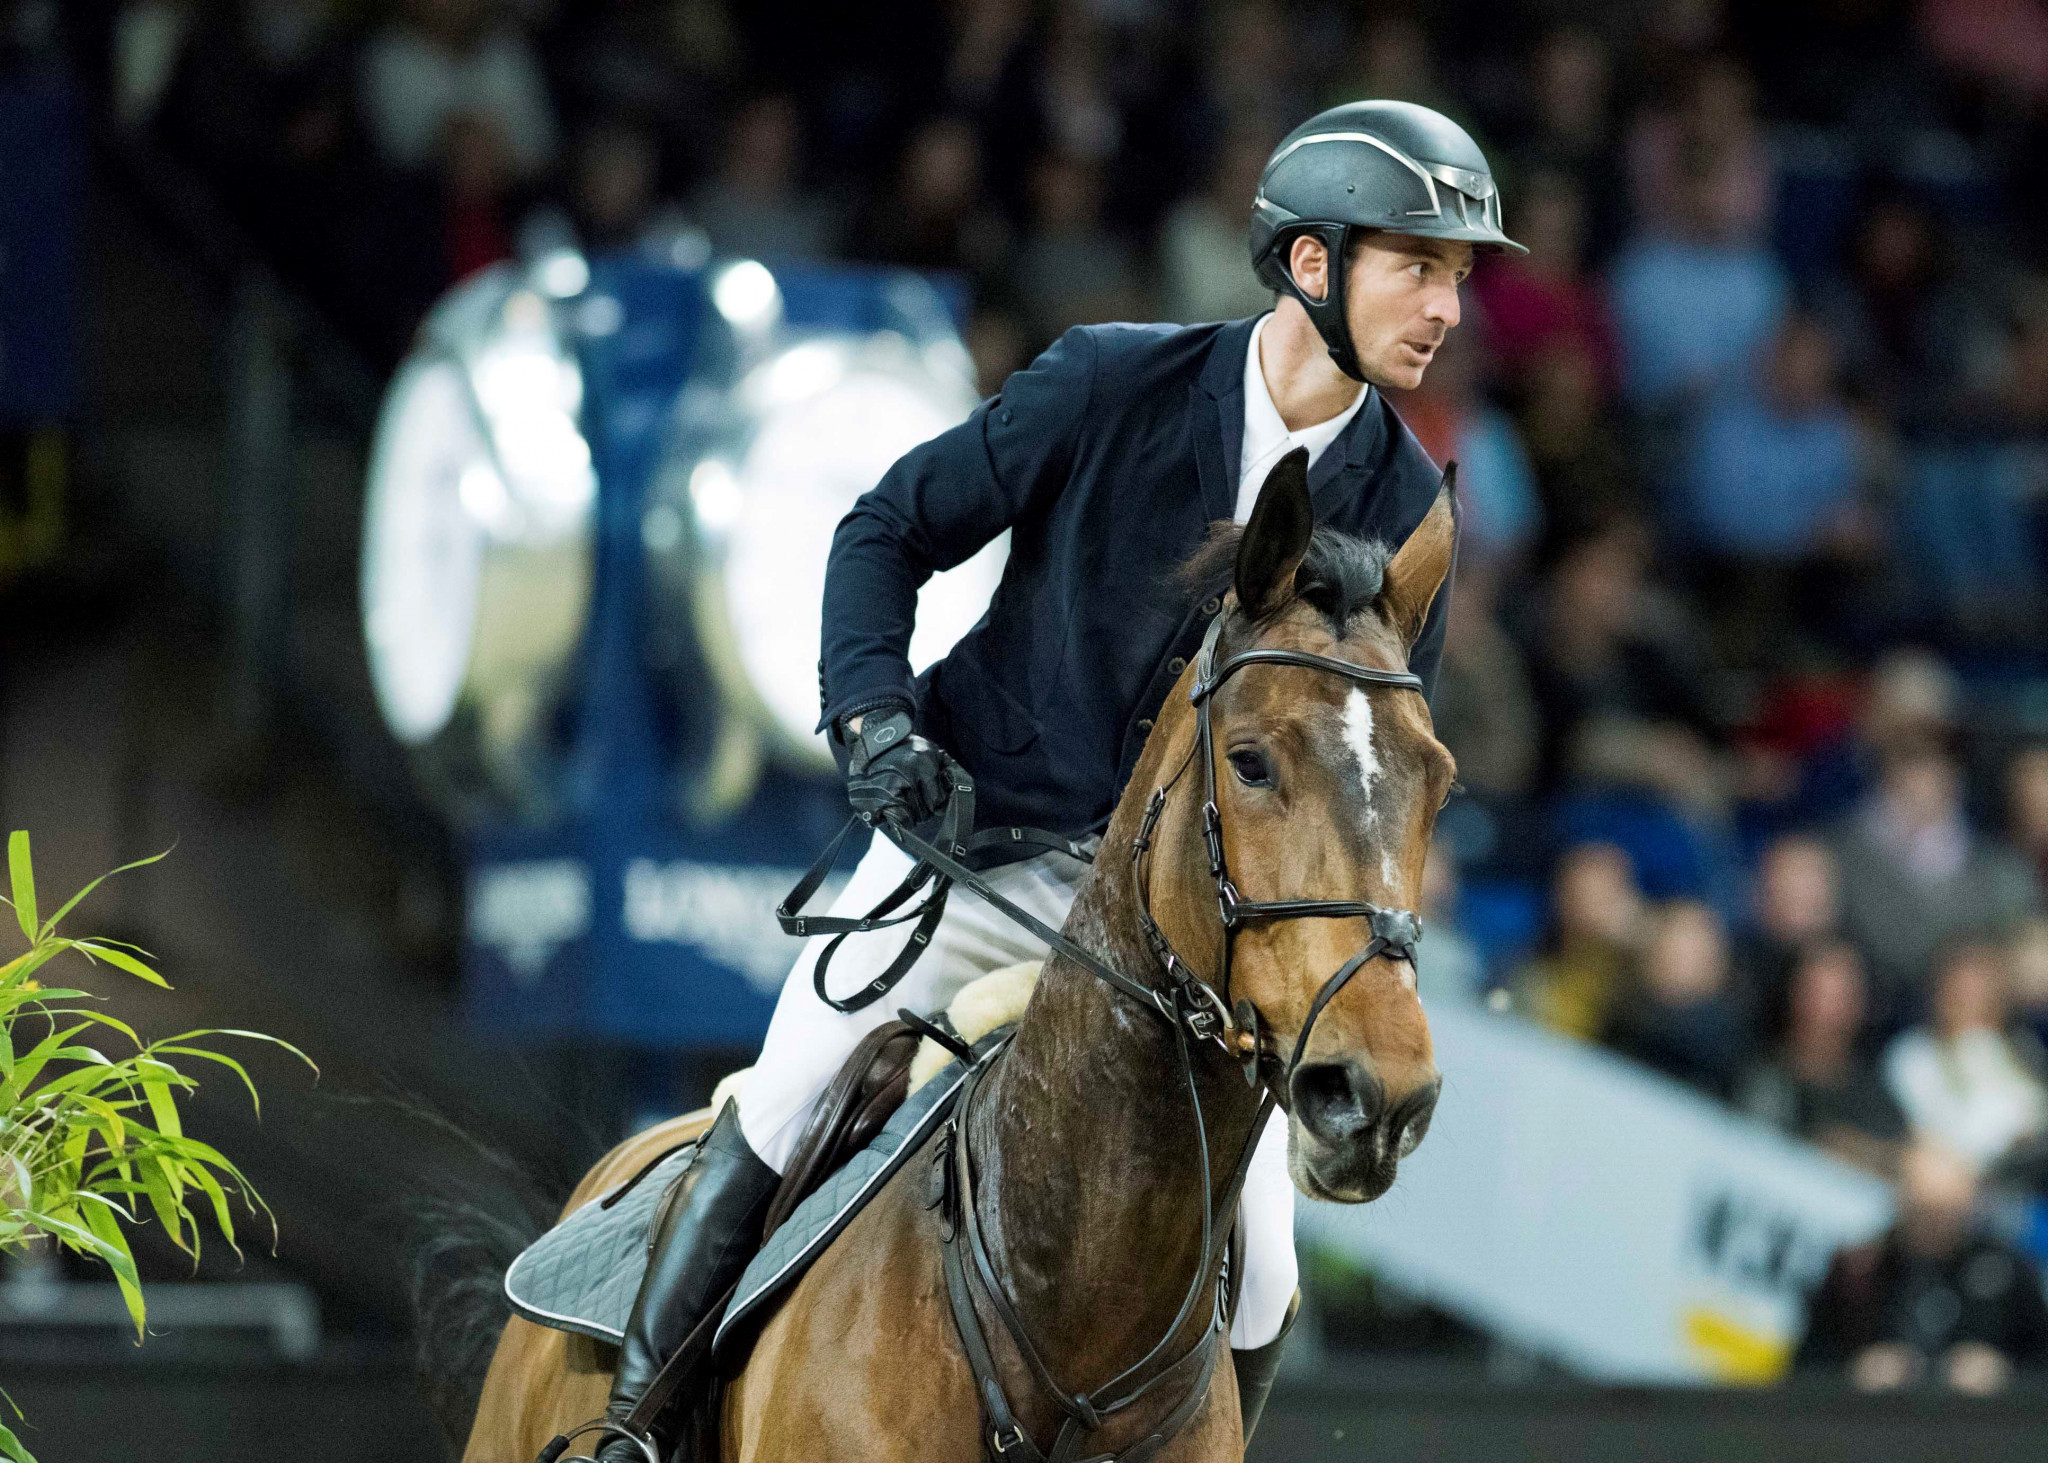 Switzerland's Steve Guerdat has reclaimed the number one spot in the FEI jumping rankings for the first time since November 2012 ©FEI